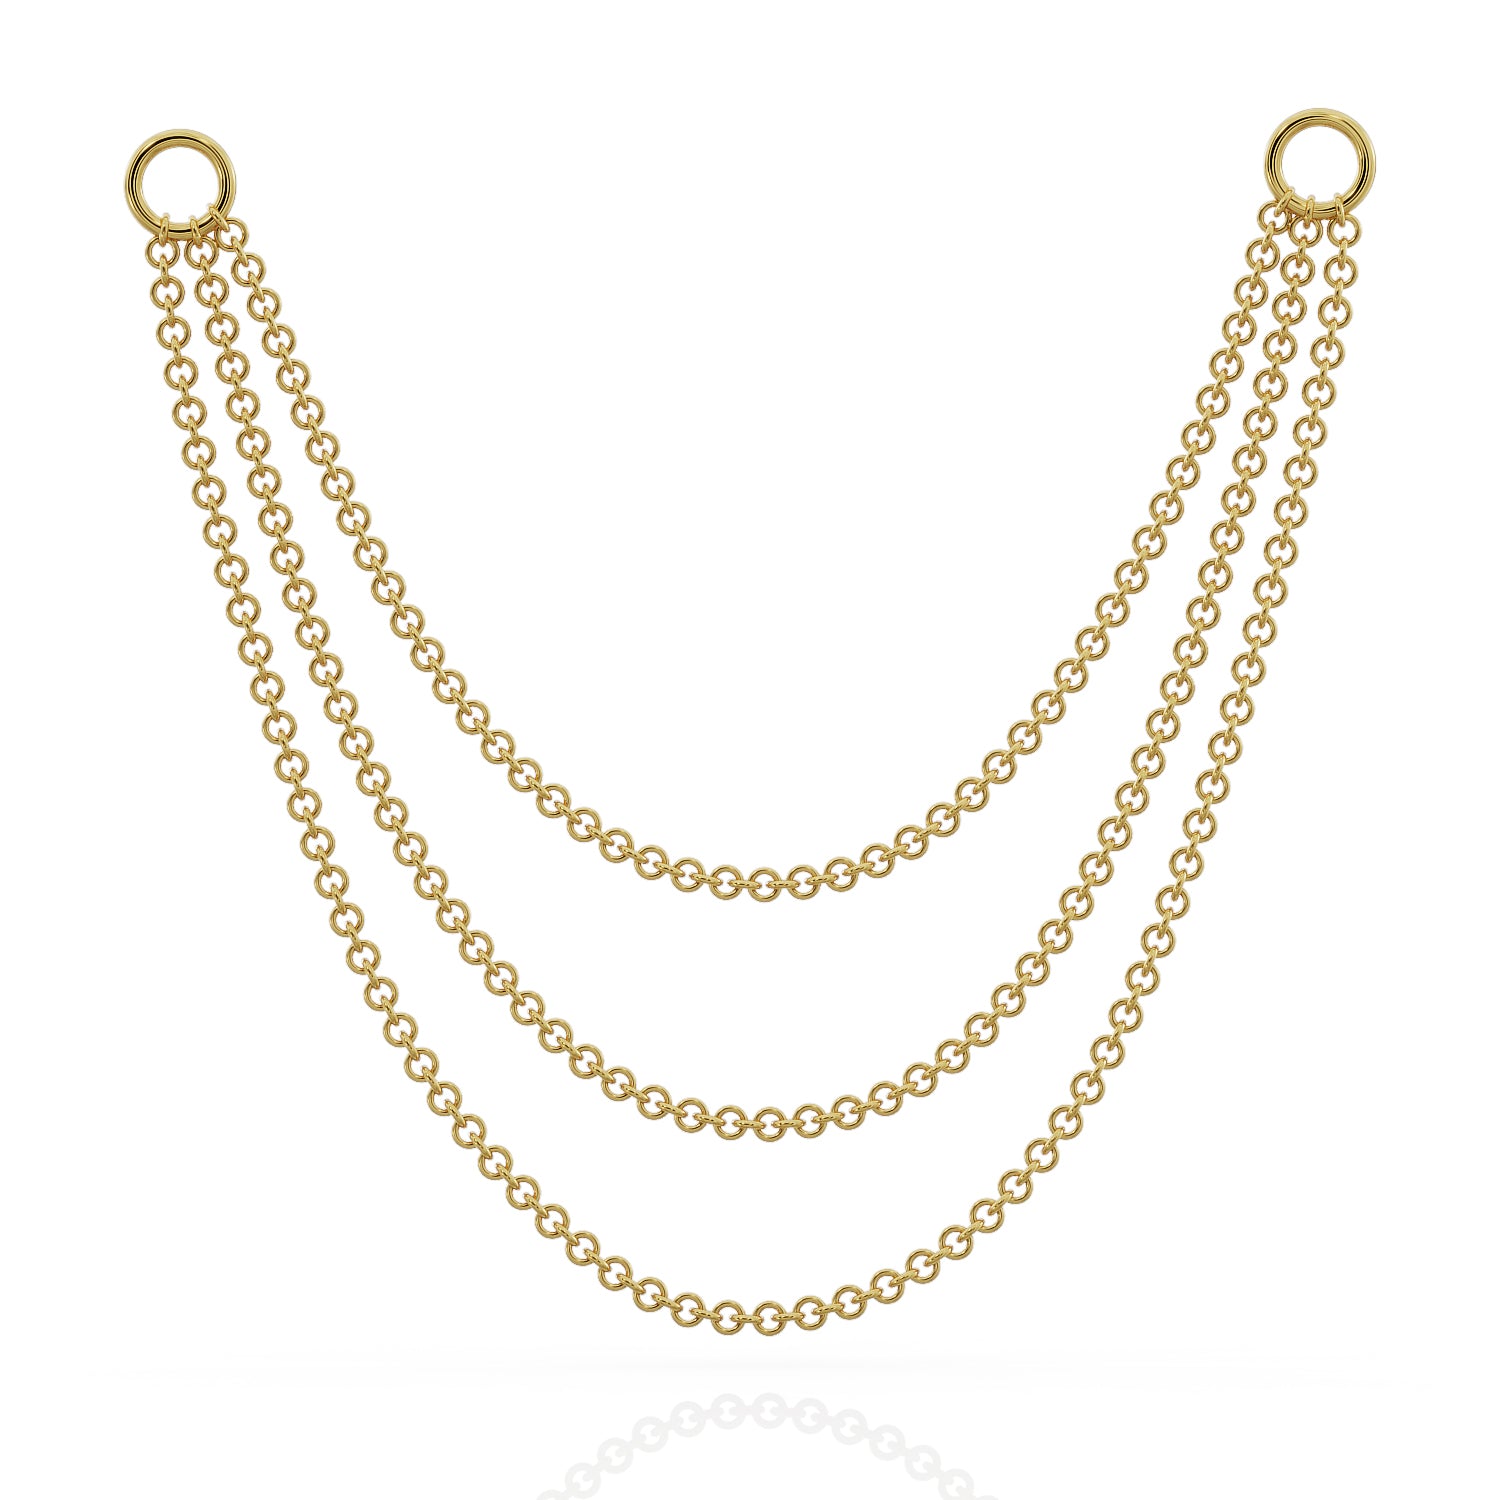 Three Link Chains Piercing Jewelry Add-on Accessory-Yellow Gold   100mm